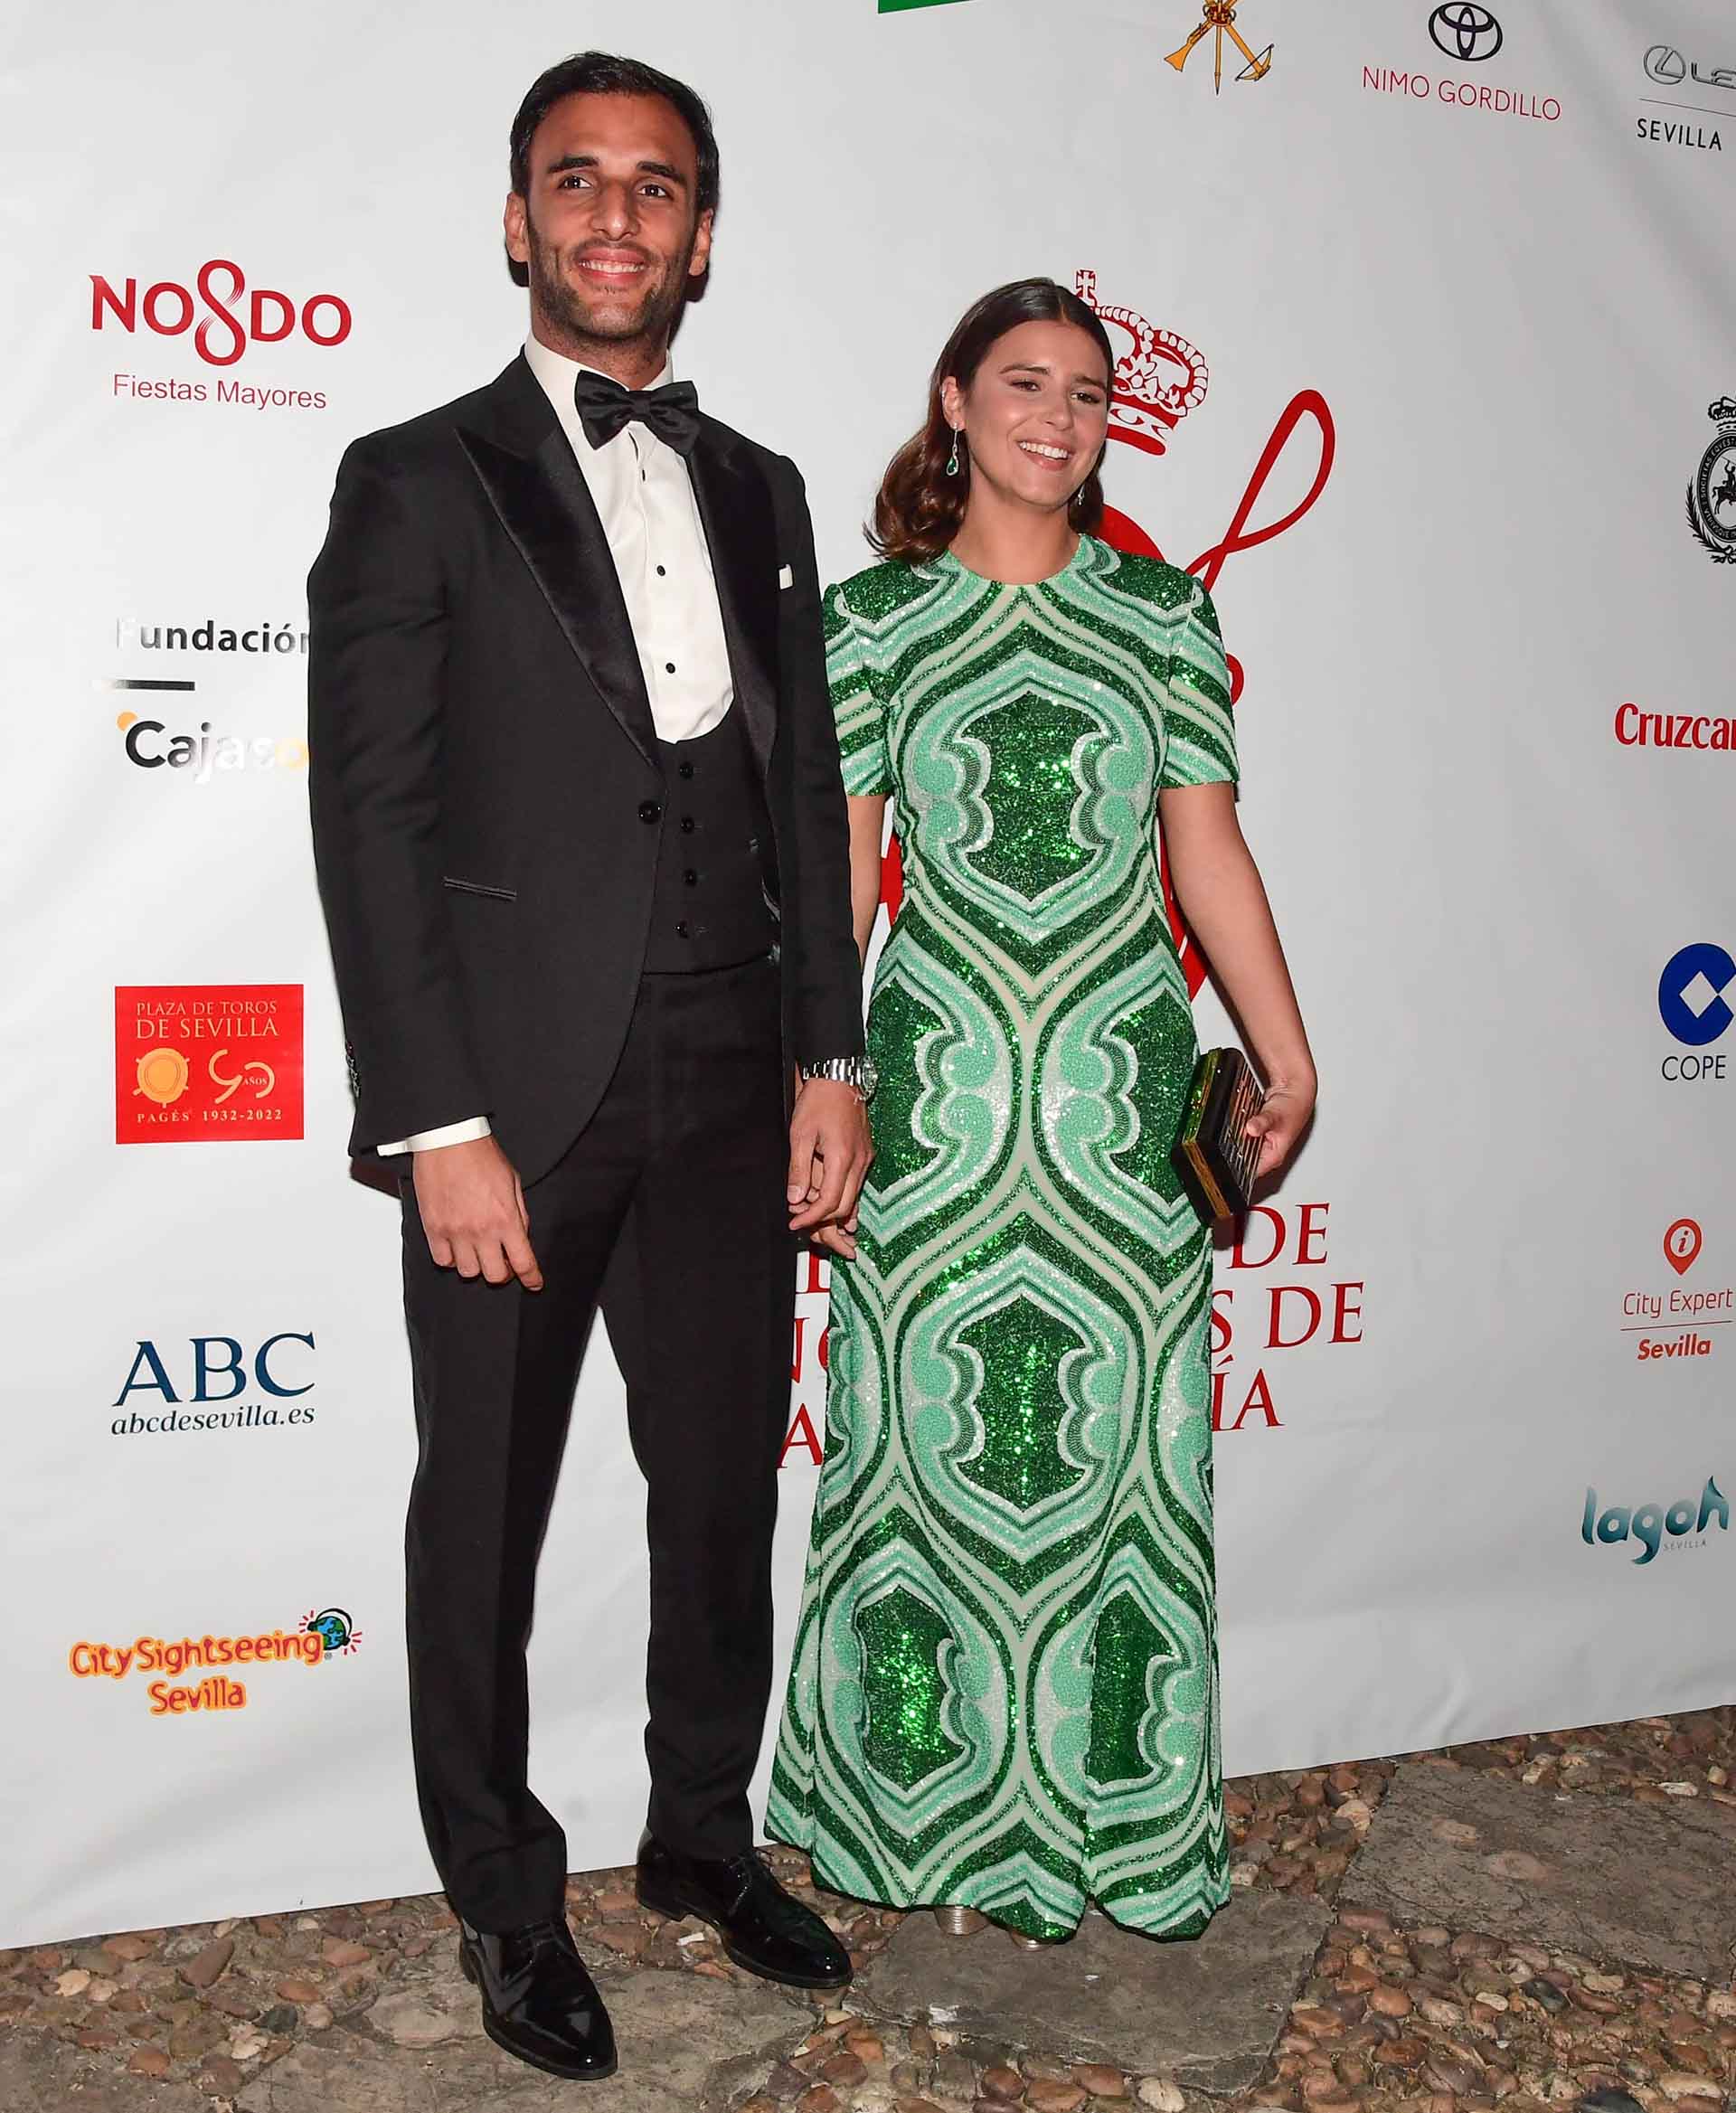 Cayetana Rivera Martinez and Manuel Vega arriving to "Los Enganches" event dinner on occasion of Sevilla Fair in Seville, April 29, 2022